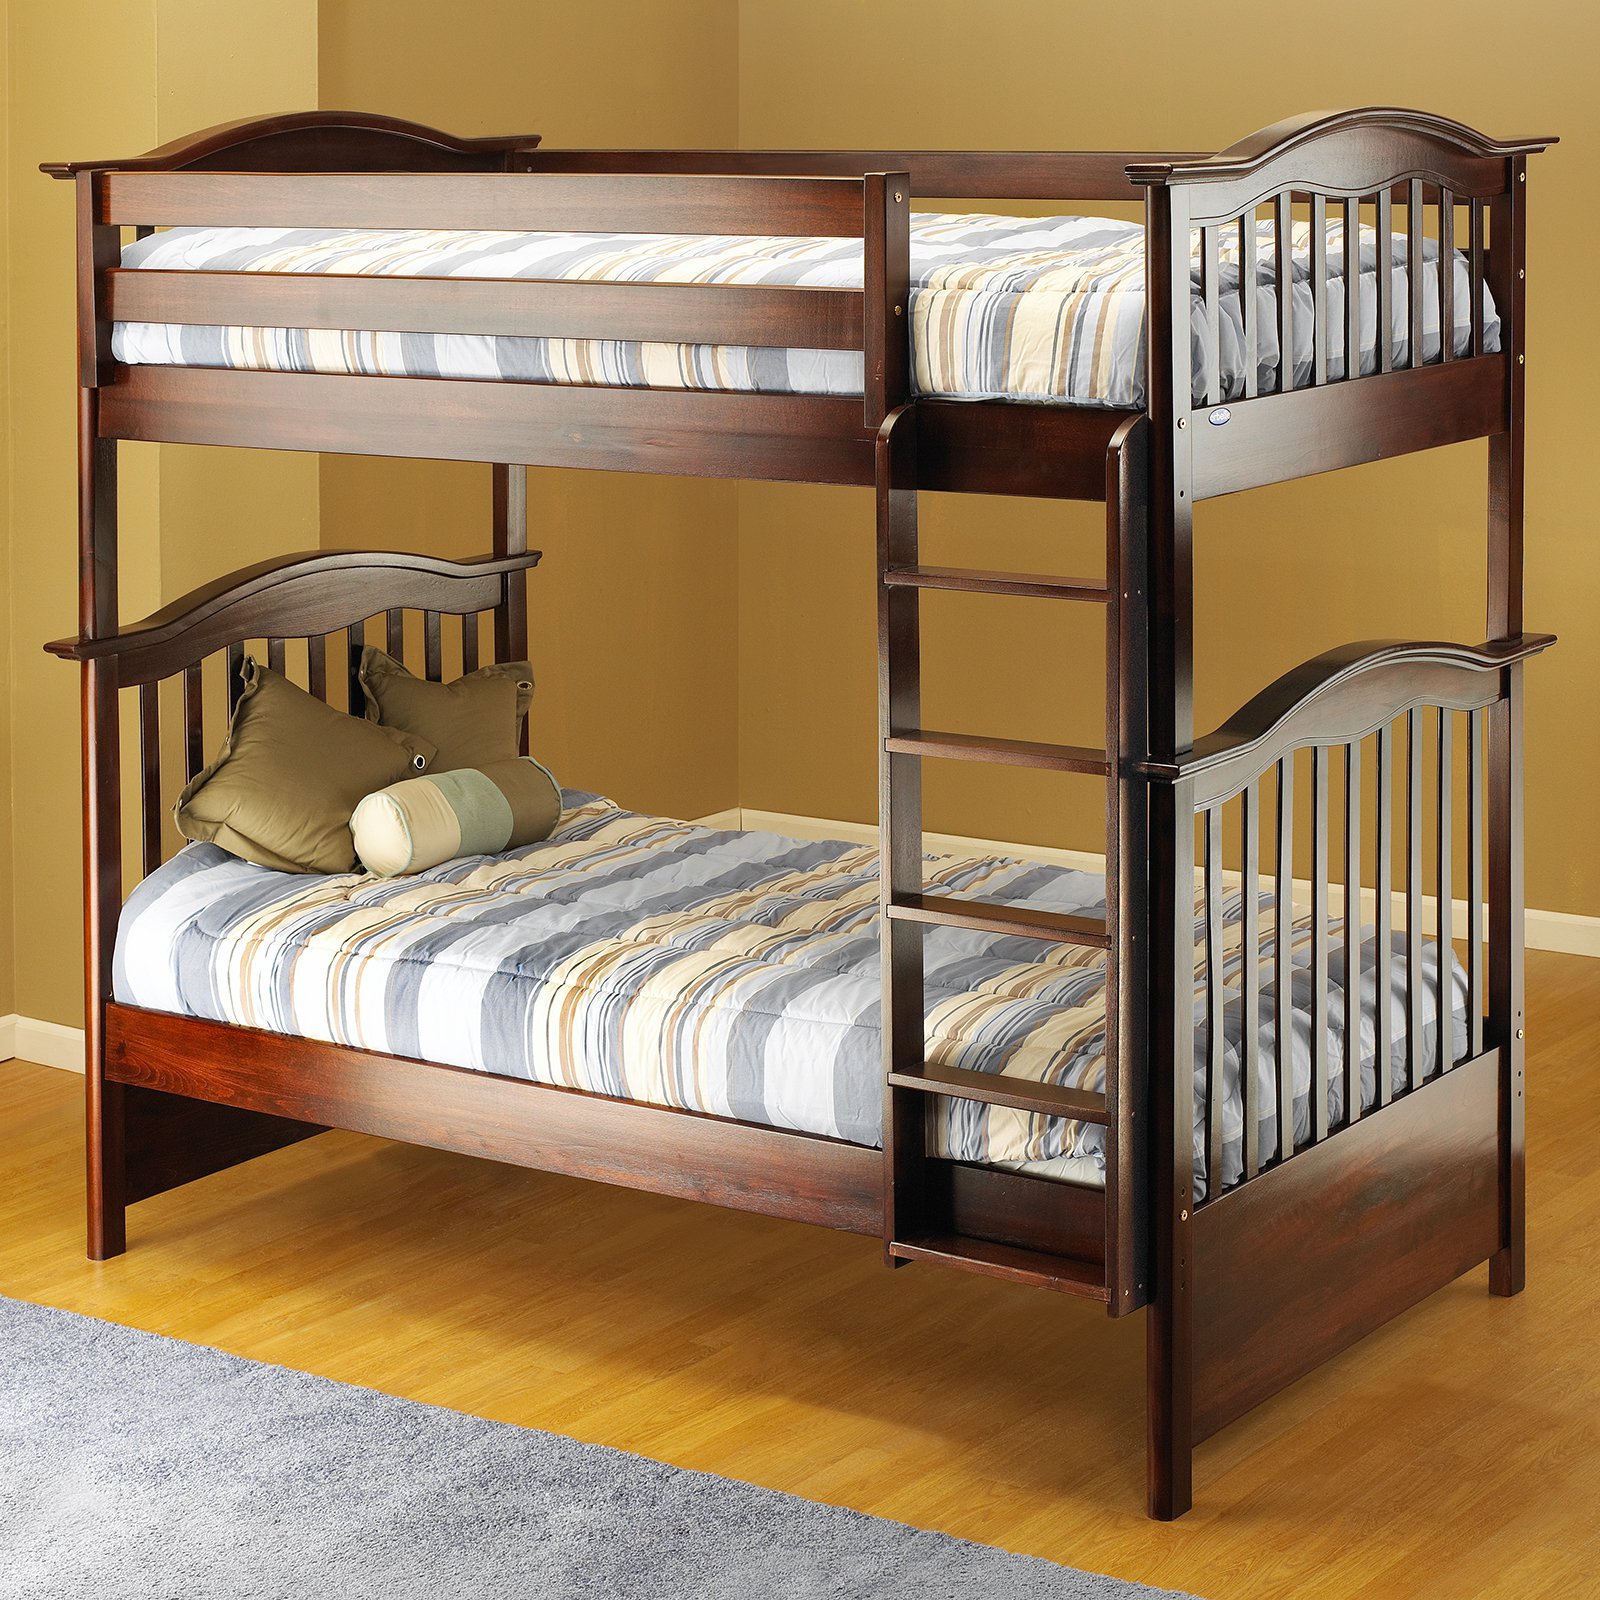 Orbelle Spindle Twin over Twin Bunk Bed - image 1 of 4